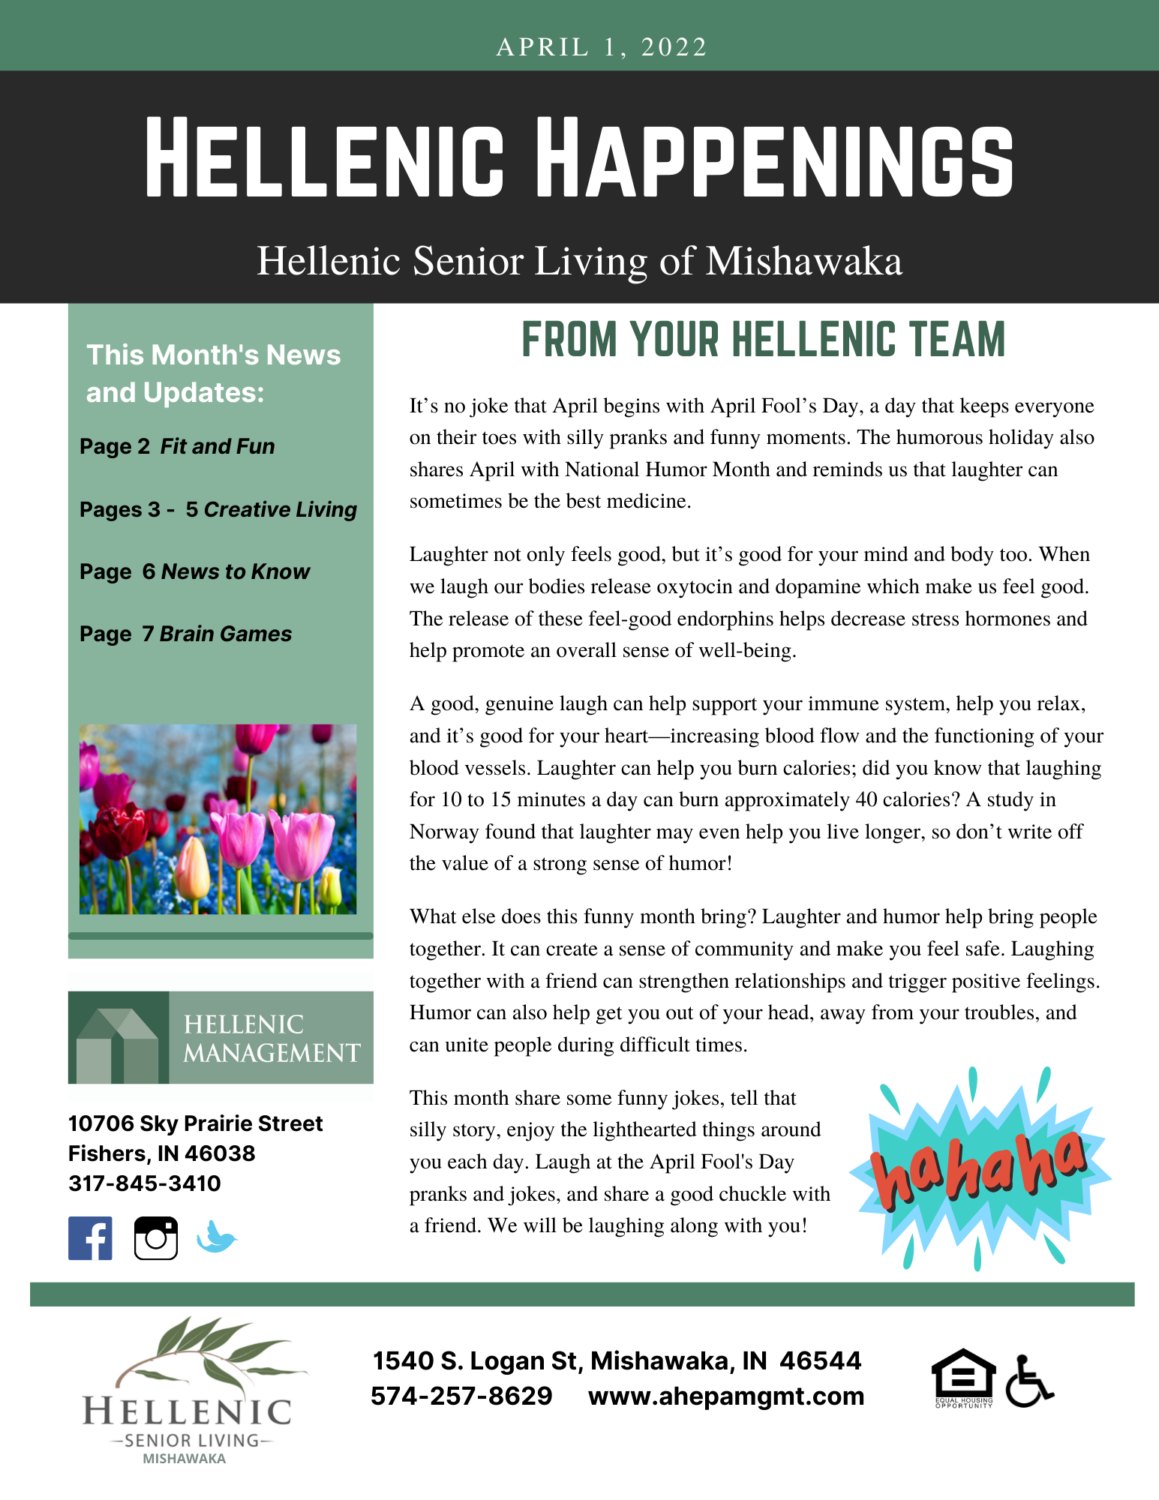 Hellenic Happenings April 2022 Newsletter, page 1